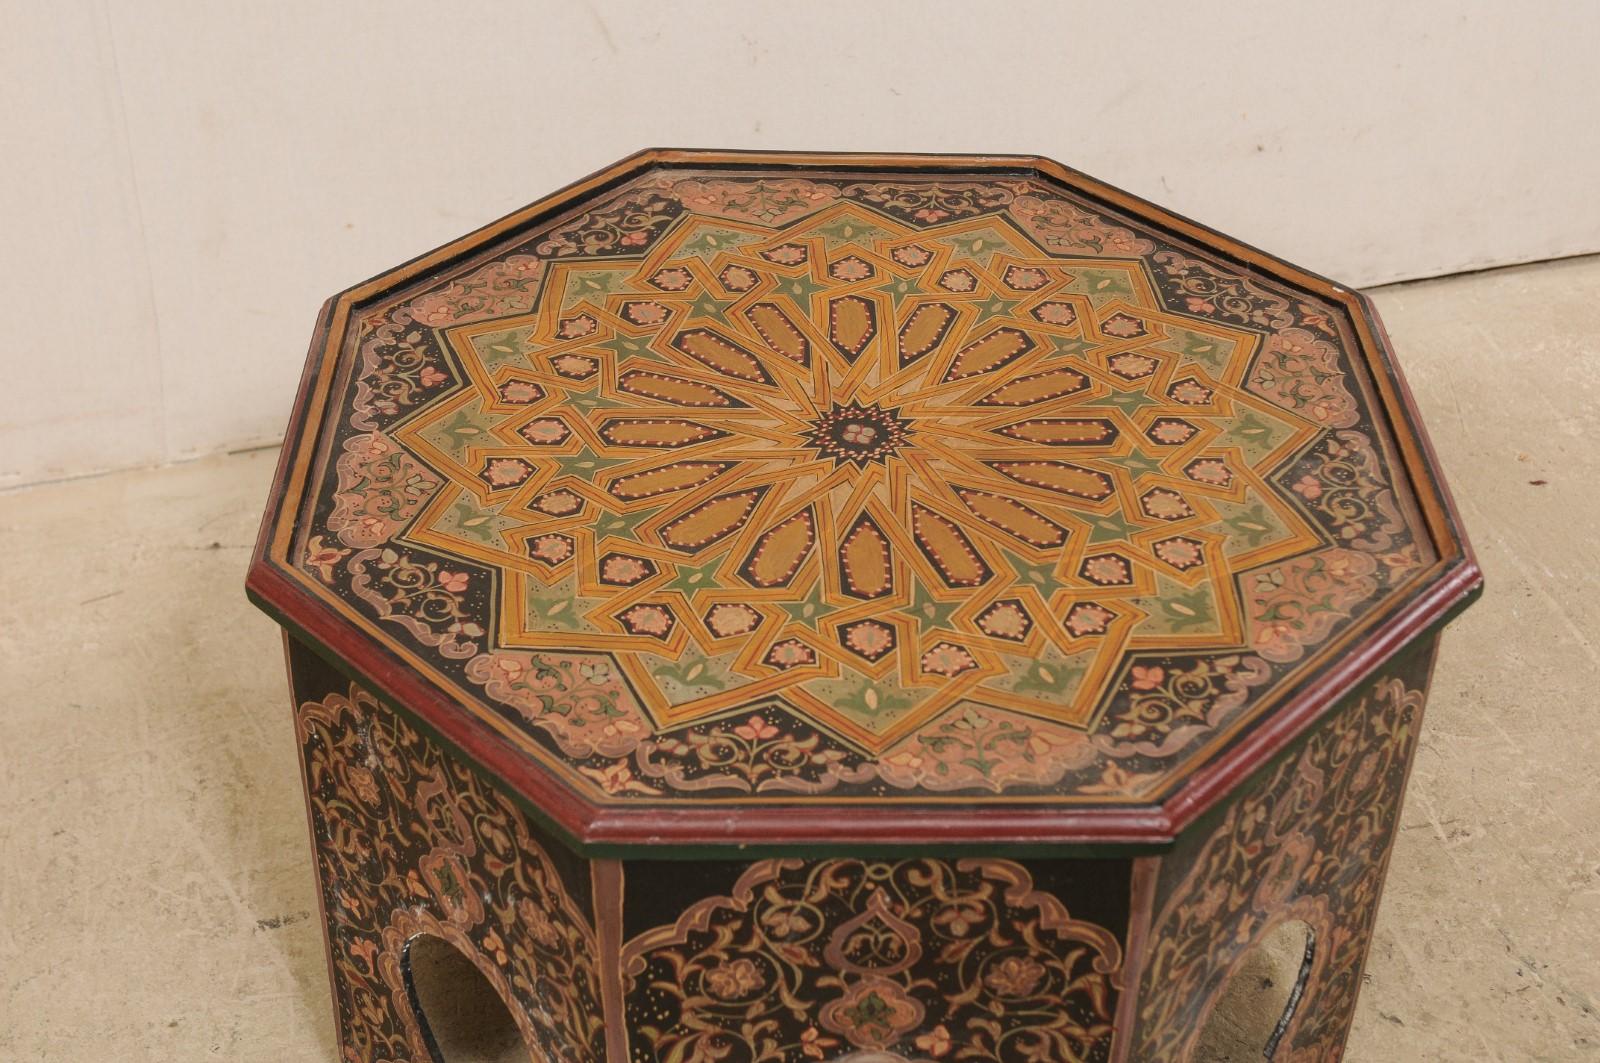 20th Century Moroccan Coffee or Tea Table Adorn with Intricate Floral and Geometric Paintings